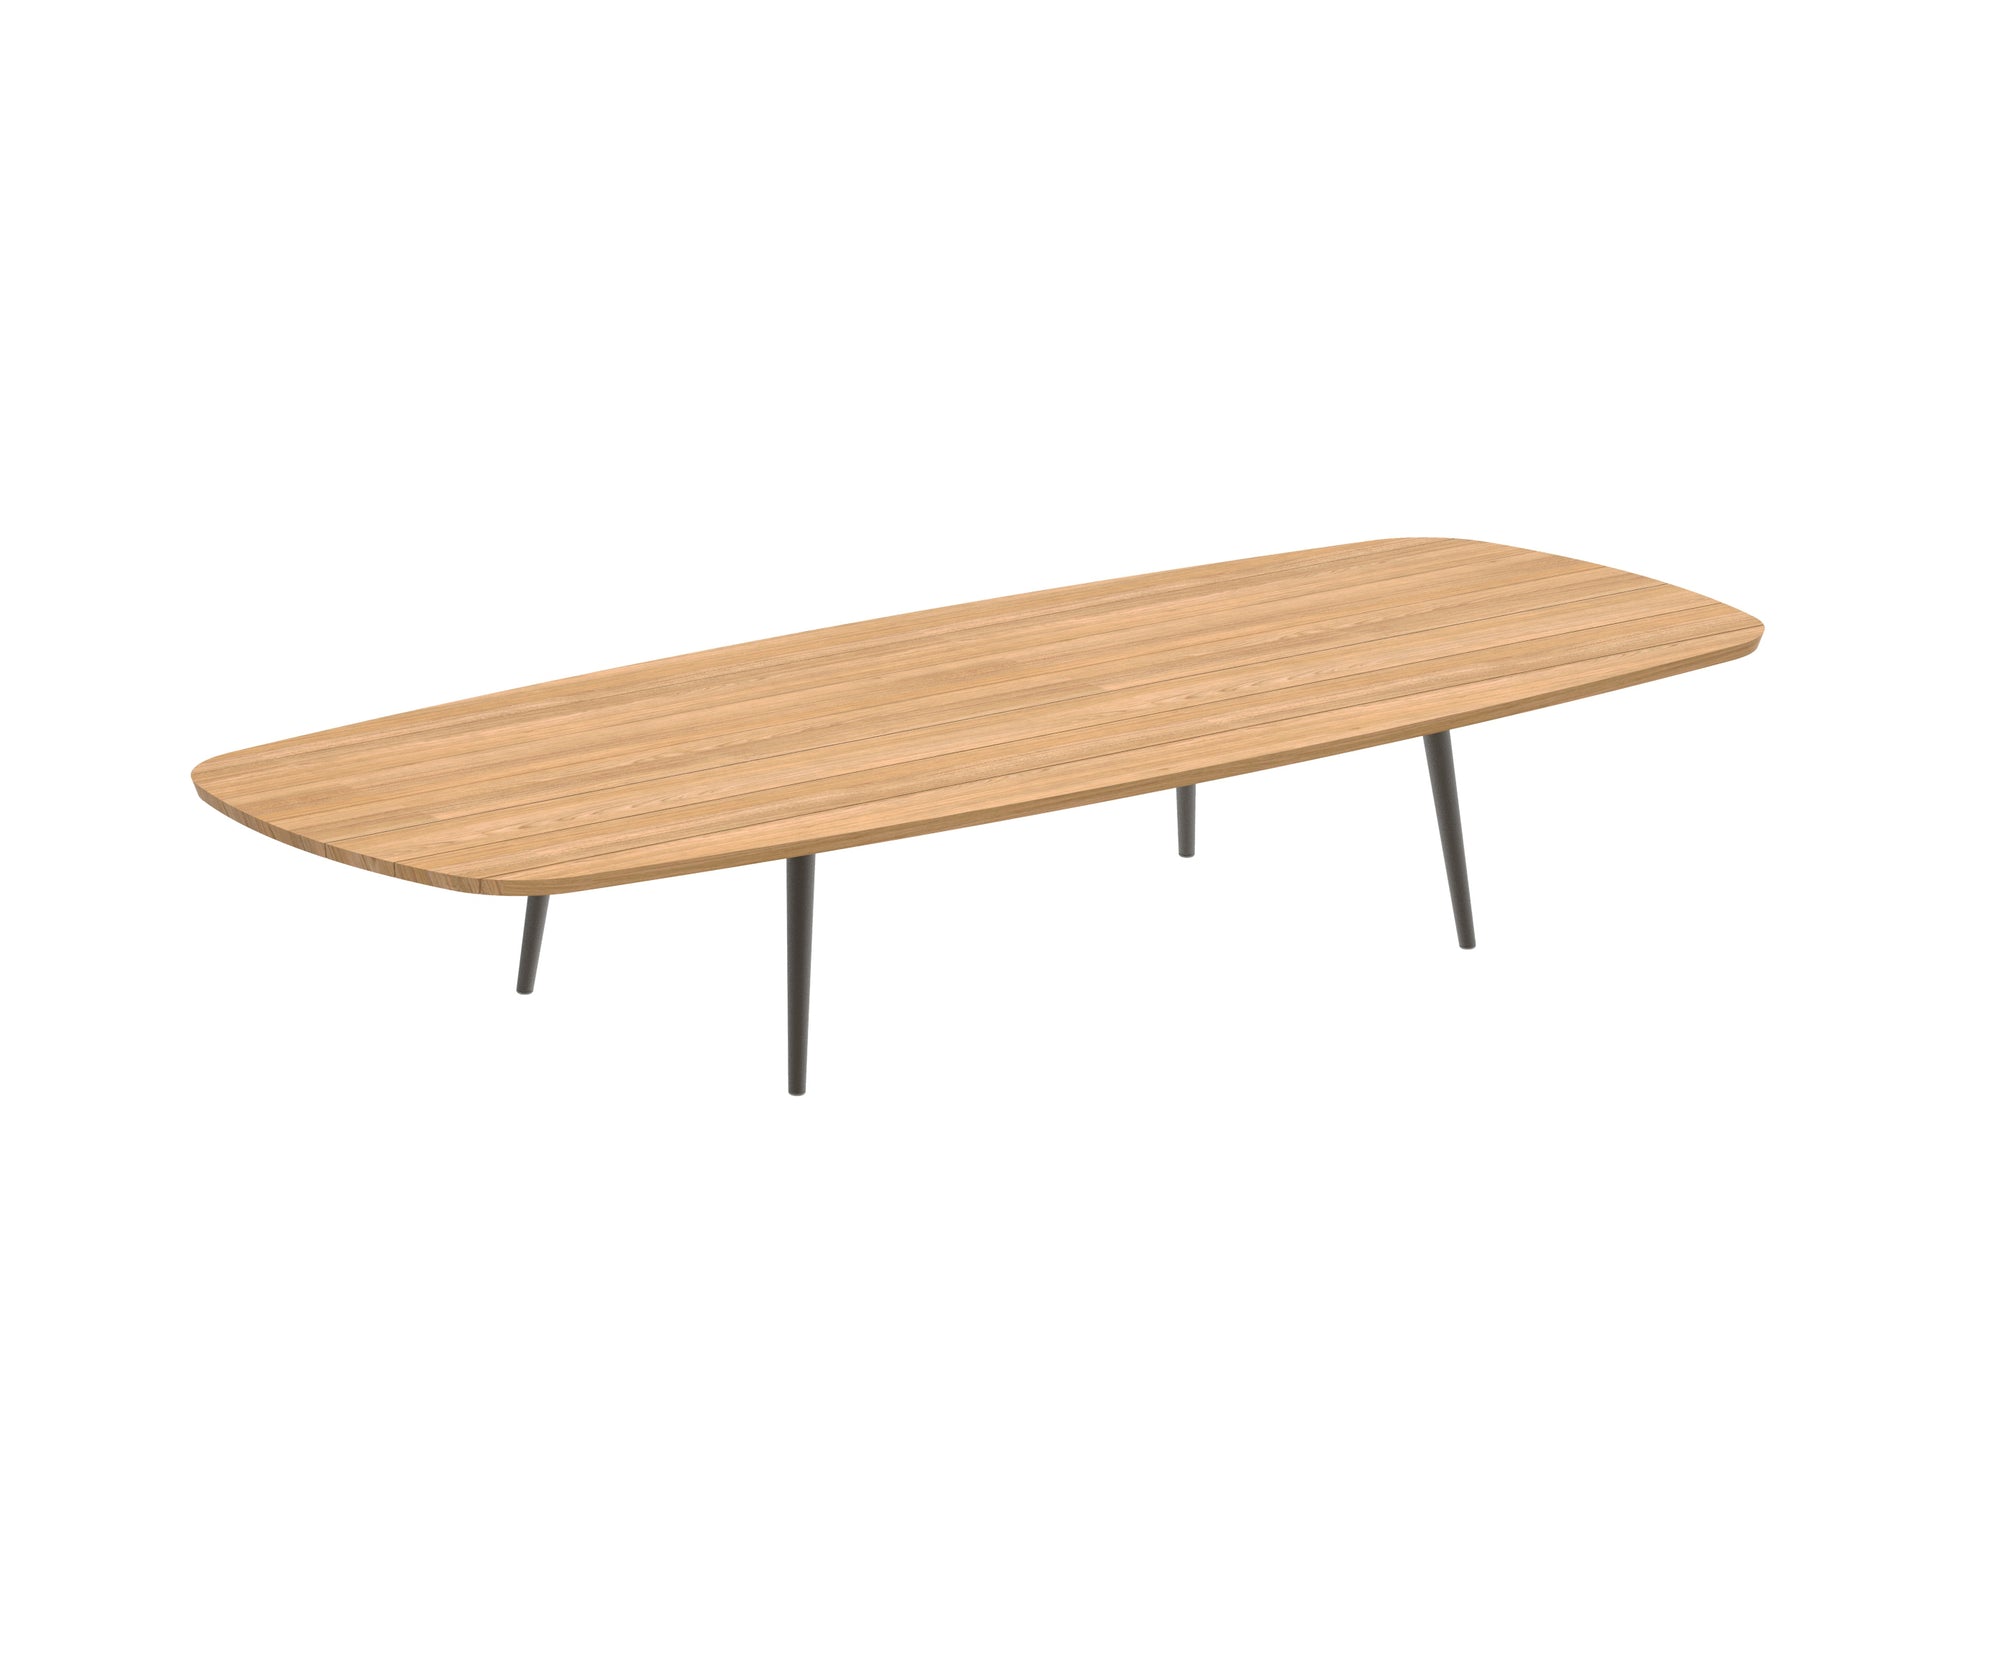 Styletto Rectangular High Lounge Table